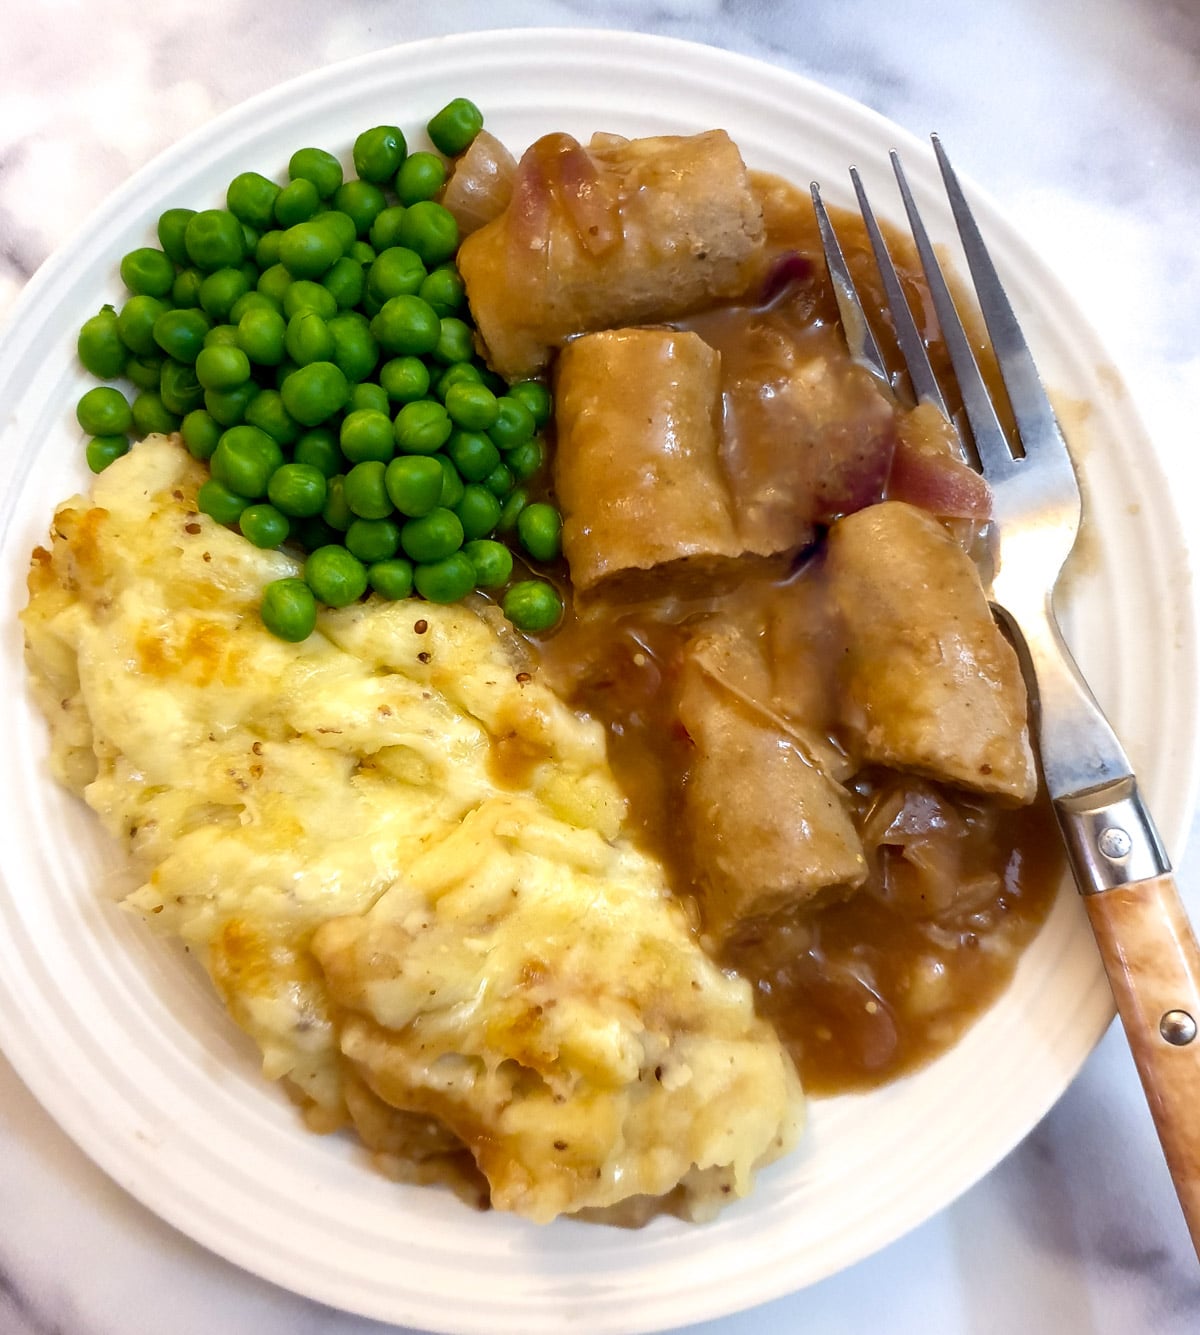 A plate of sausage cottage pie with a side of peas.